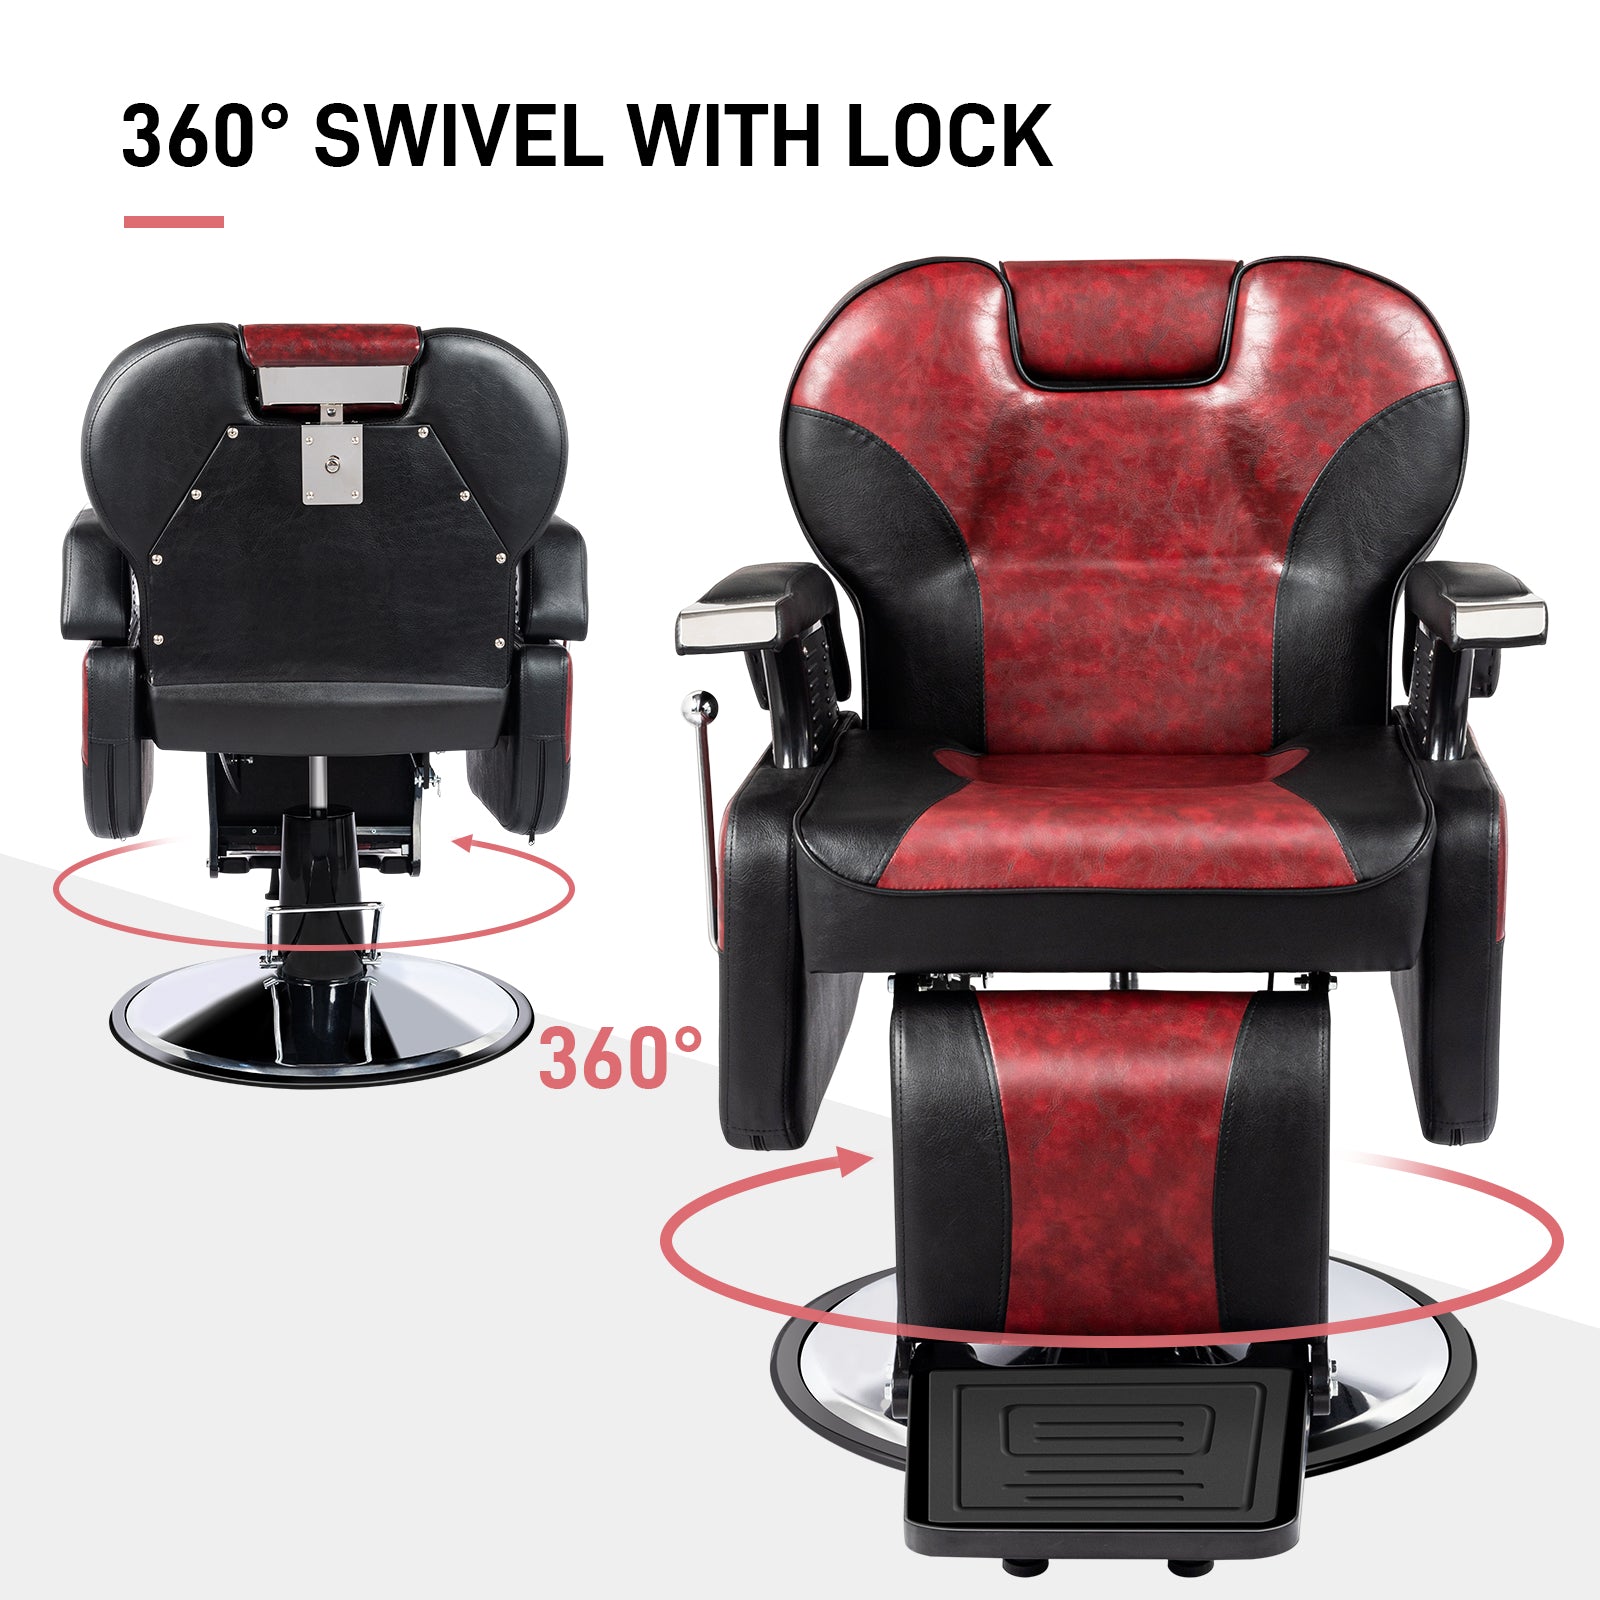 Barber Child Chair Booster Seats W/Leather Cushion